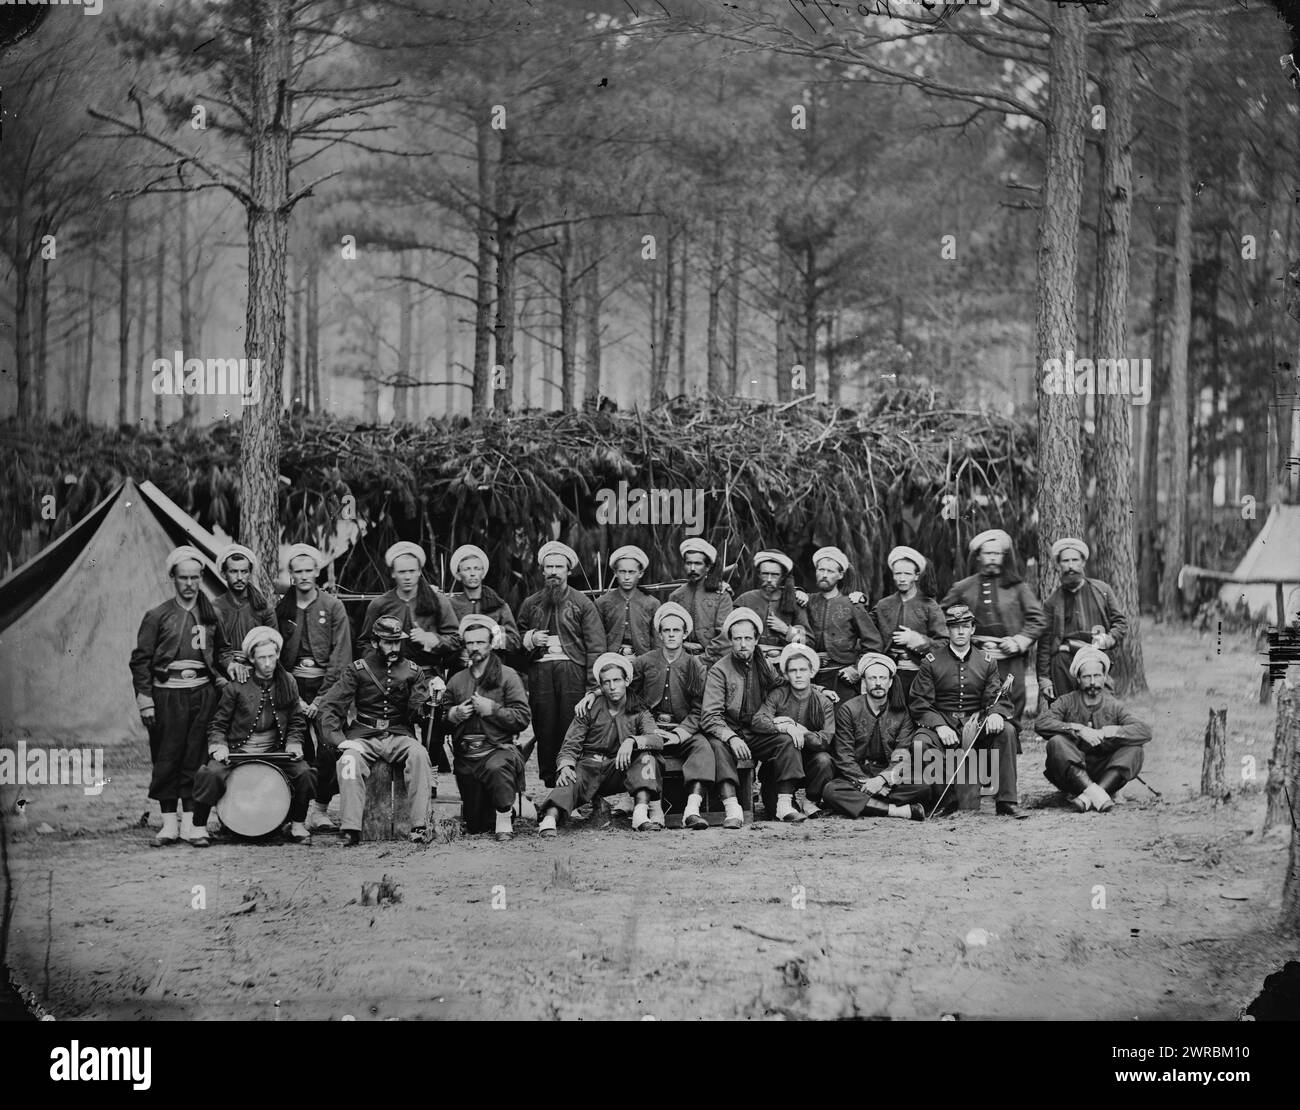 Petersburg, Va. Company H, 114th Pennsylvania Infantry (Zouaves), Photograph from the main eastern theater of war, the siege of Petersburg, June 1864-April 1865., 1864 August., United States., Army., Pennsylvania Infantry Regiment, 114th (1862-1865)., Company H, Wet collodion negatives., Wet collodion negatives, 1 negative: glass, wet collodion Stock Photo